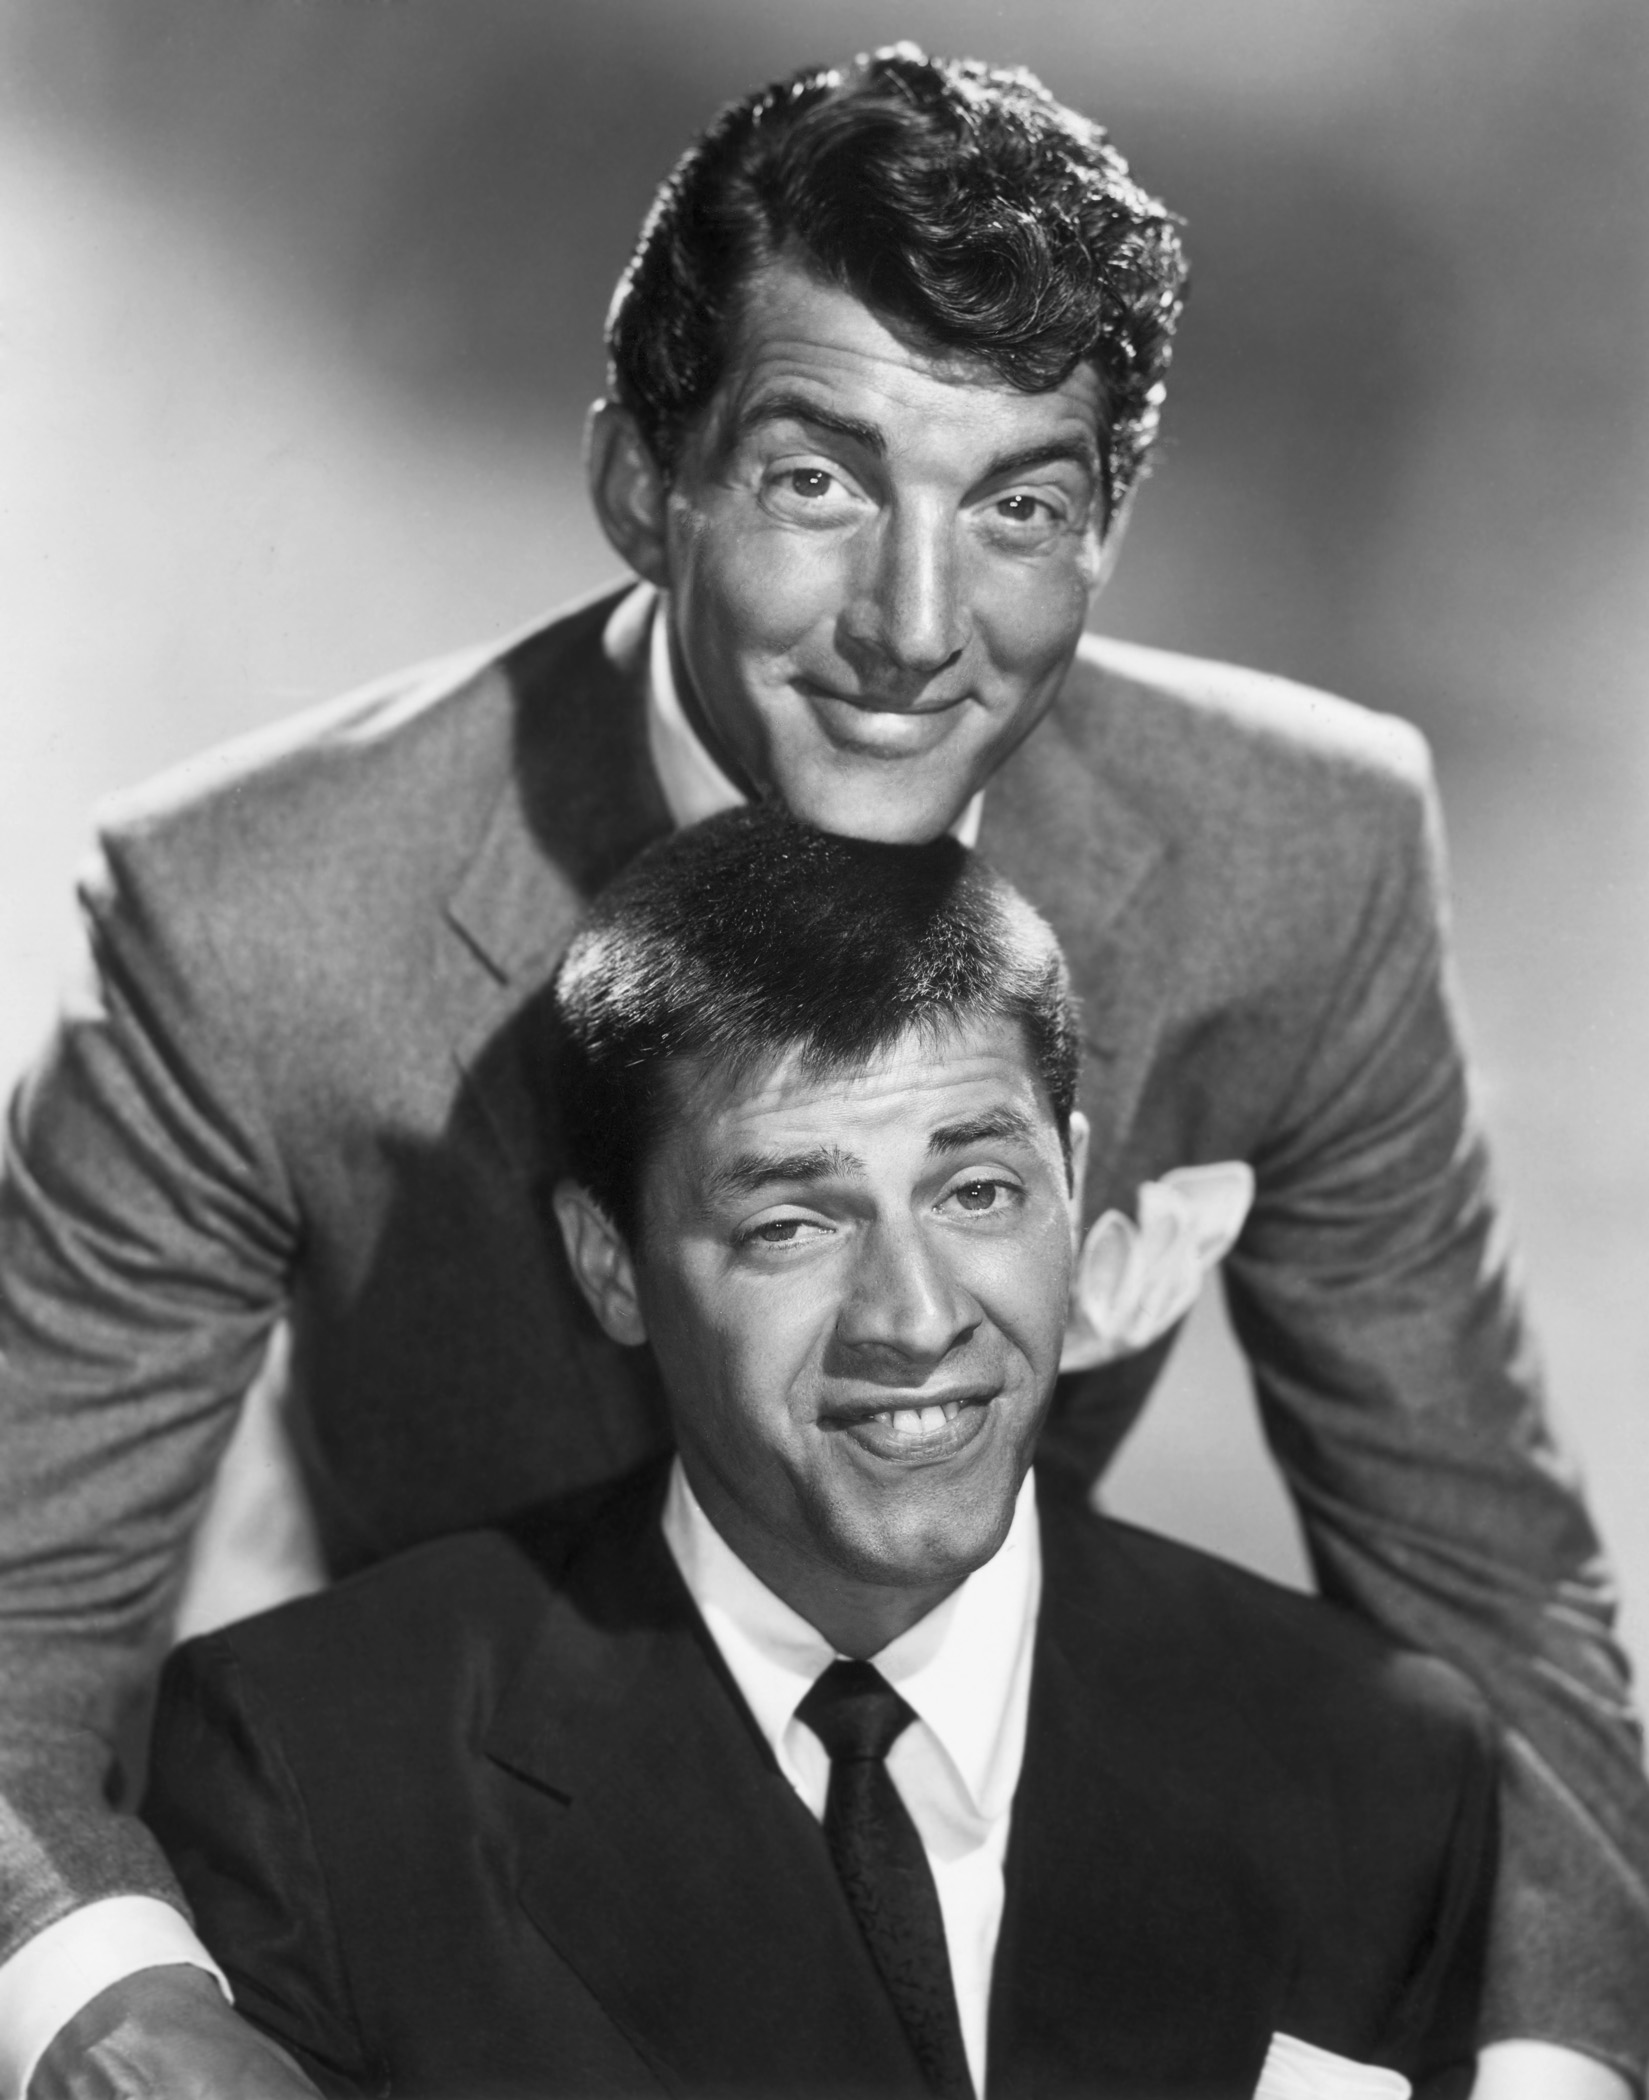 Jerry Lewis and Dean Martin in Hollywood circa 1955